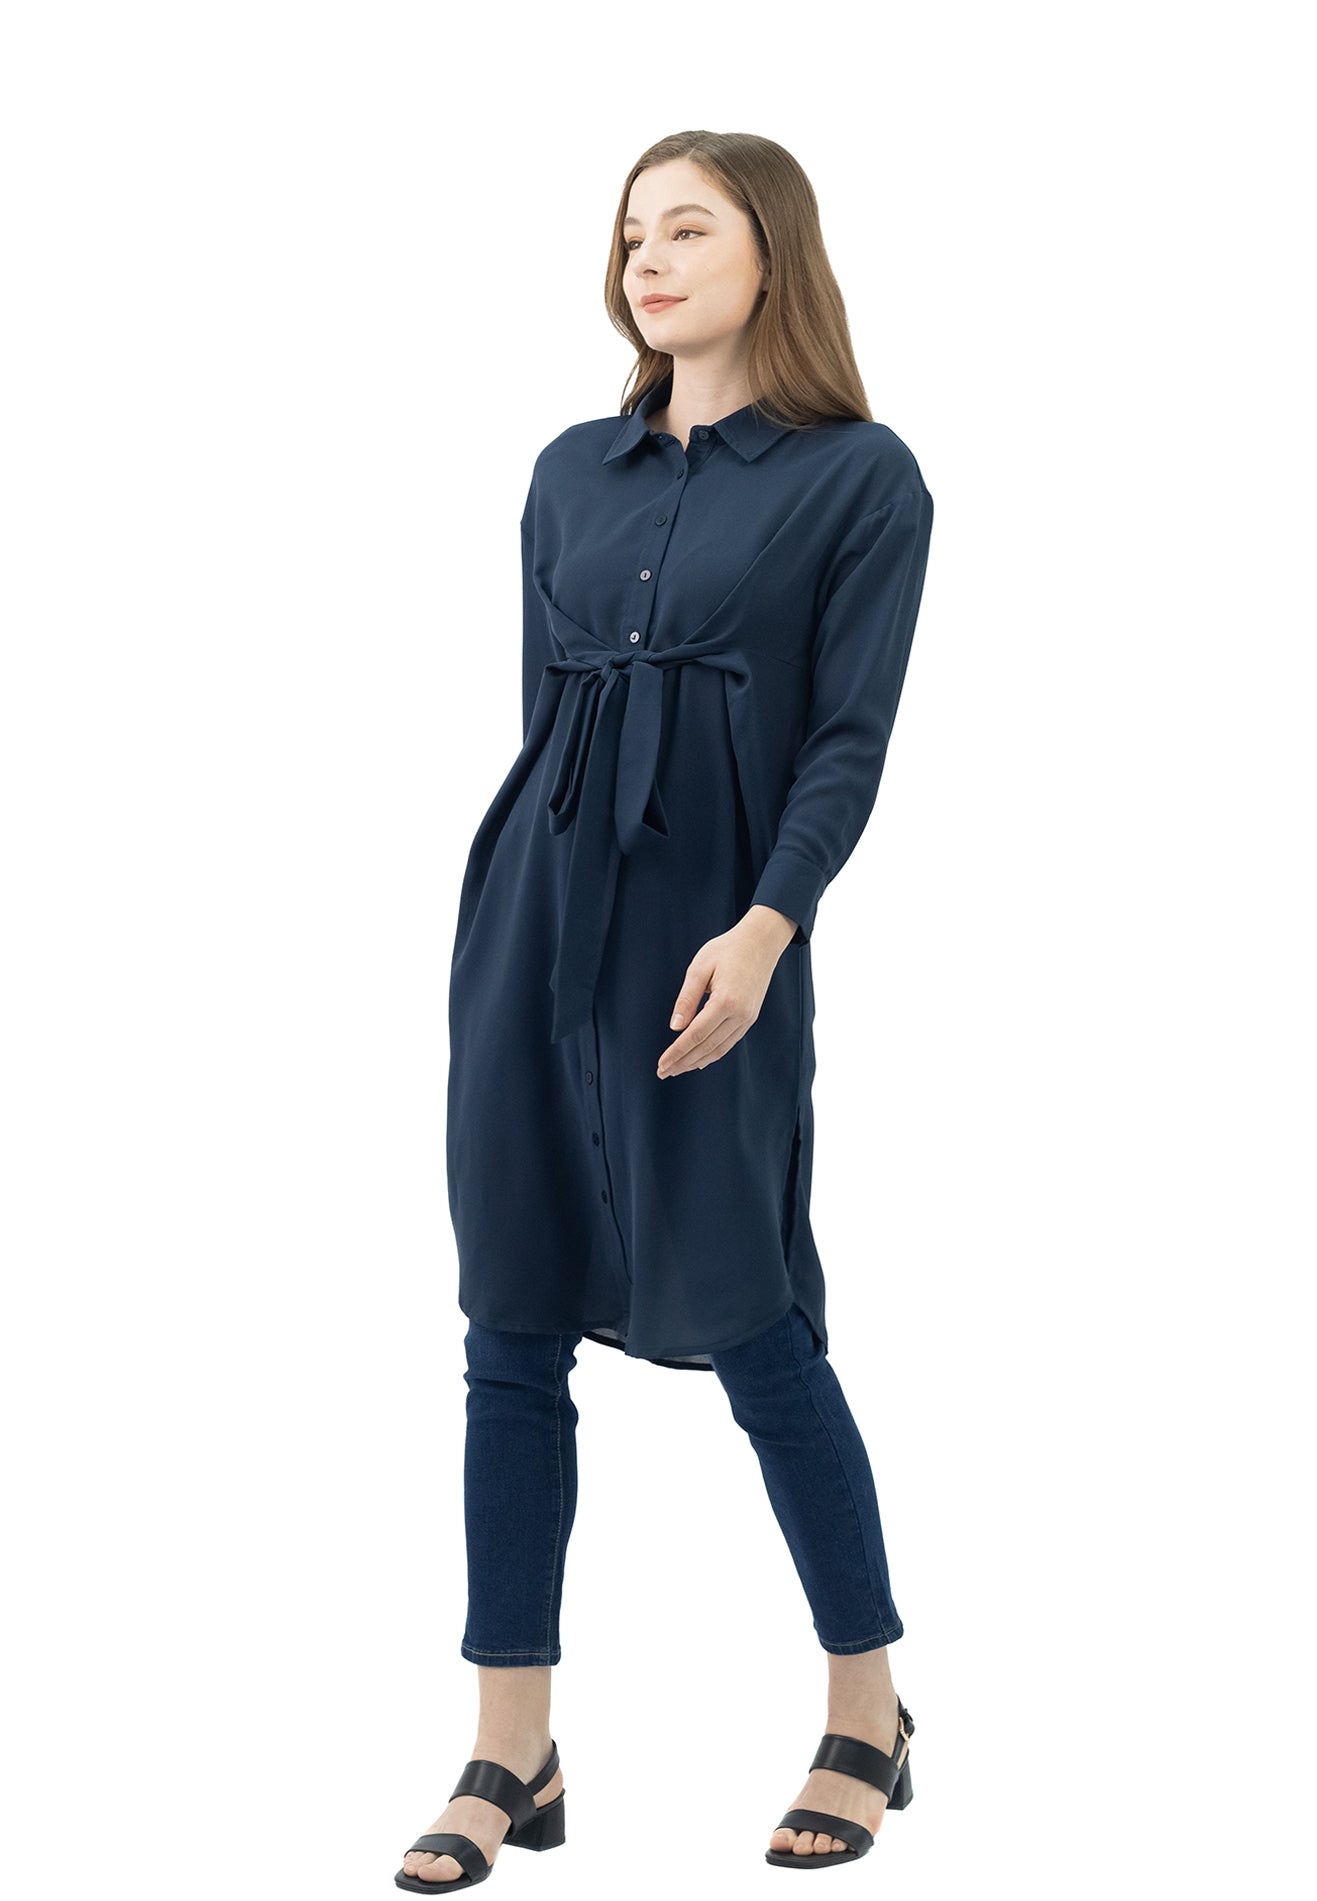 DAISY BY VOIR Collared Tie Front Wrap Dress